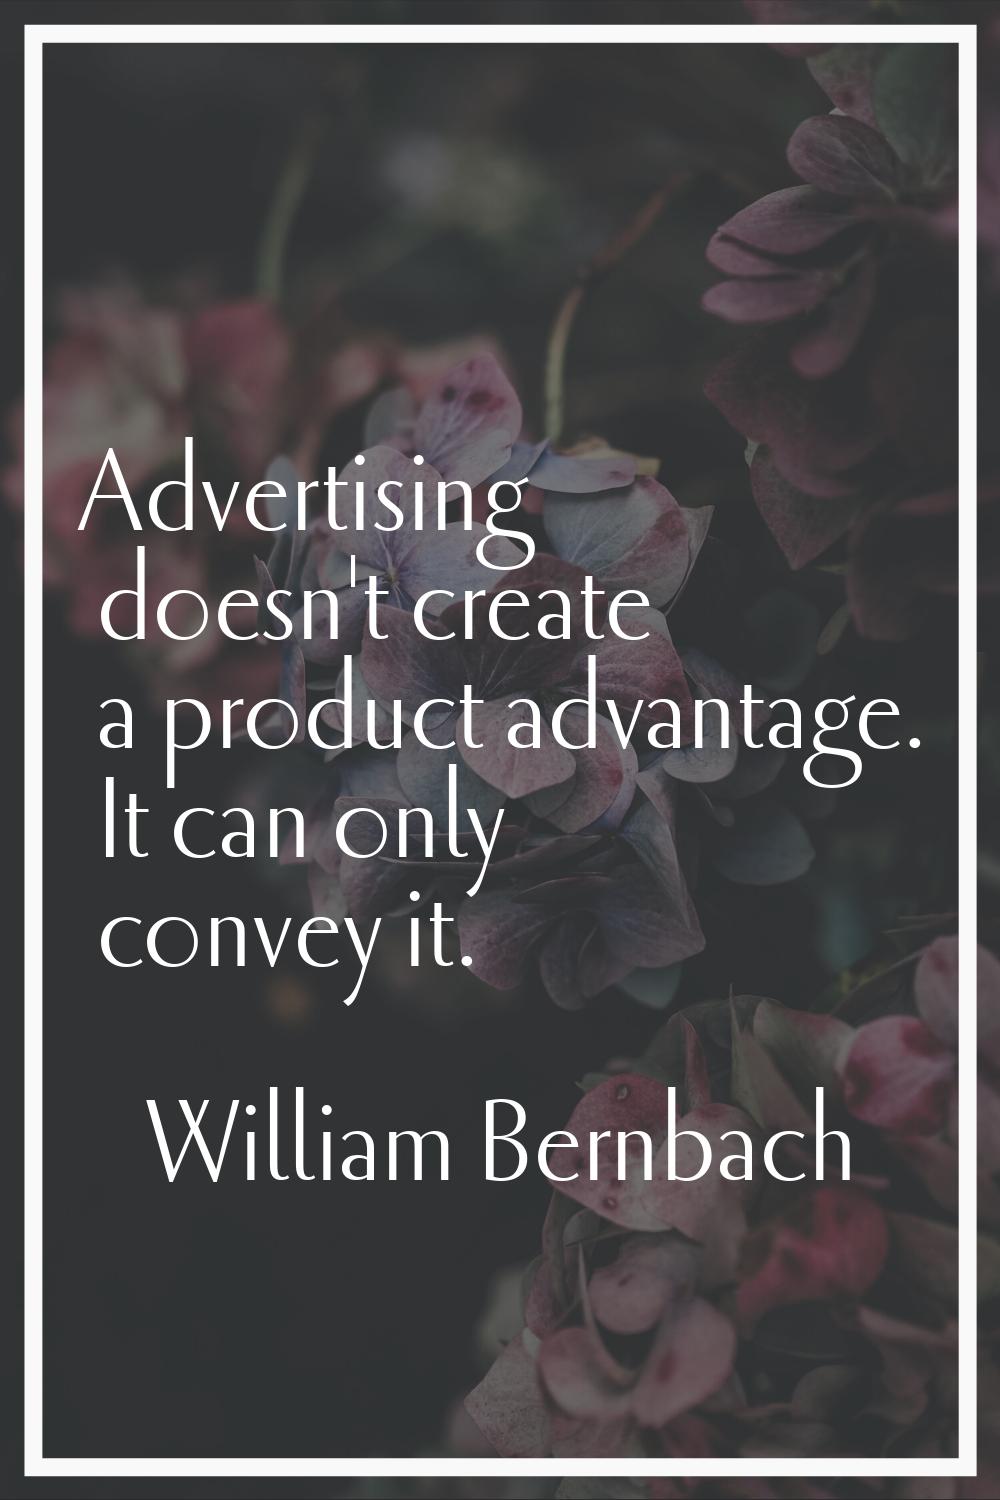 Advertising doesn't create a product advantage. It can only convey it.